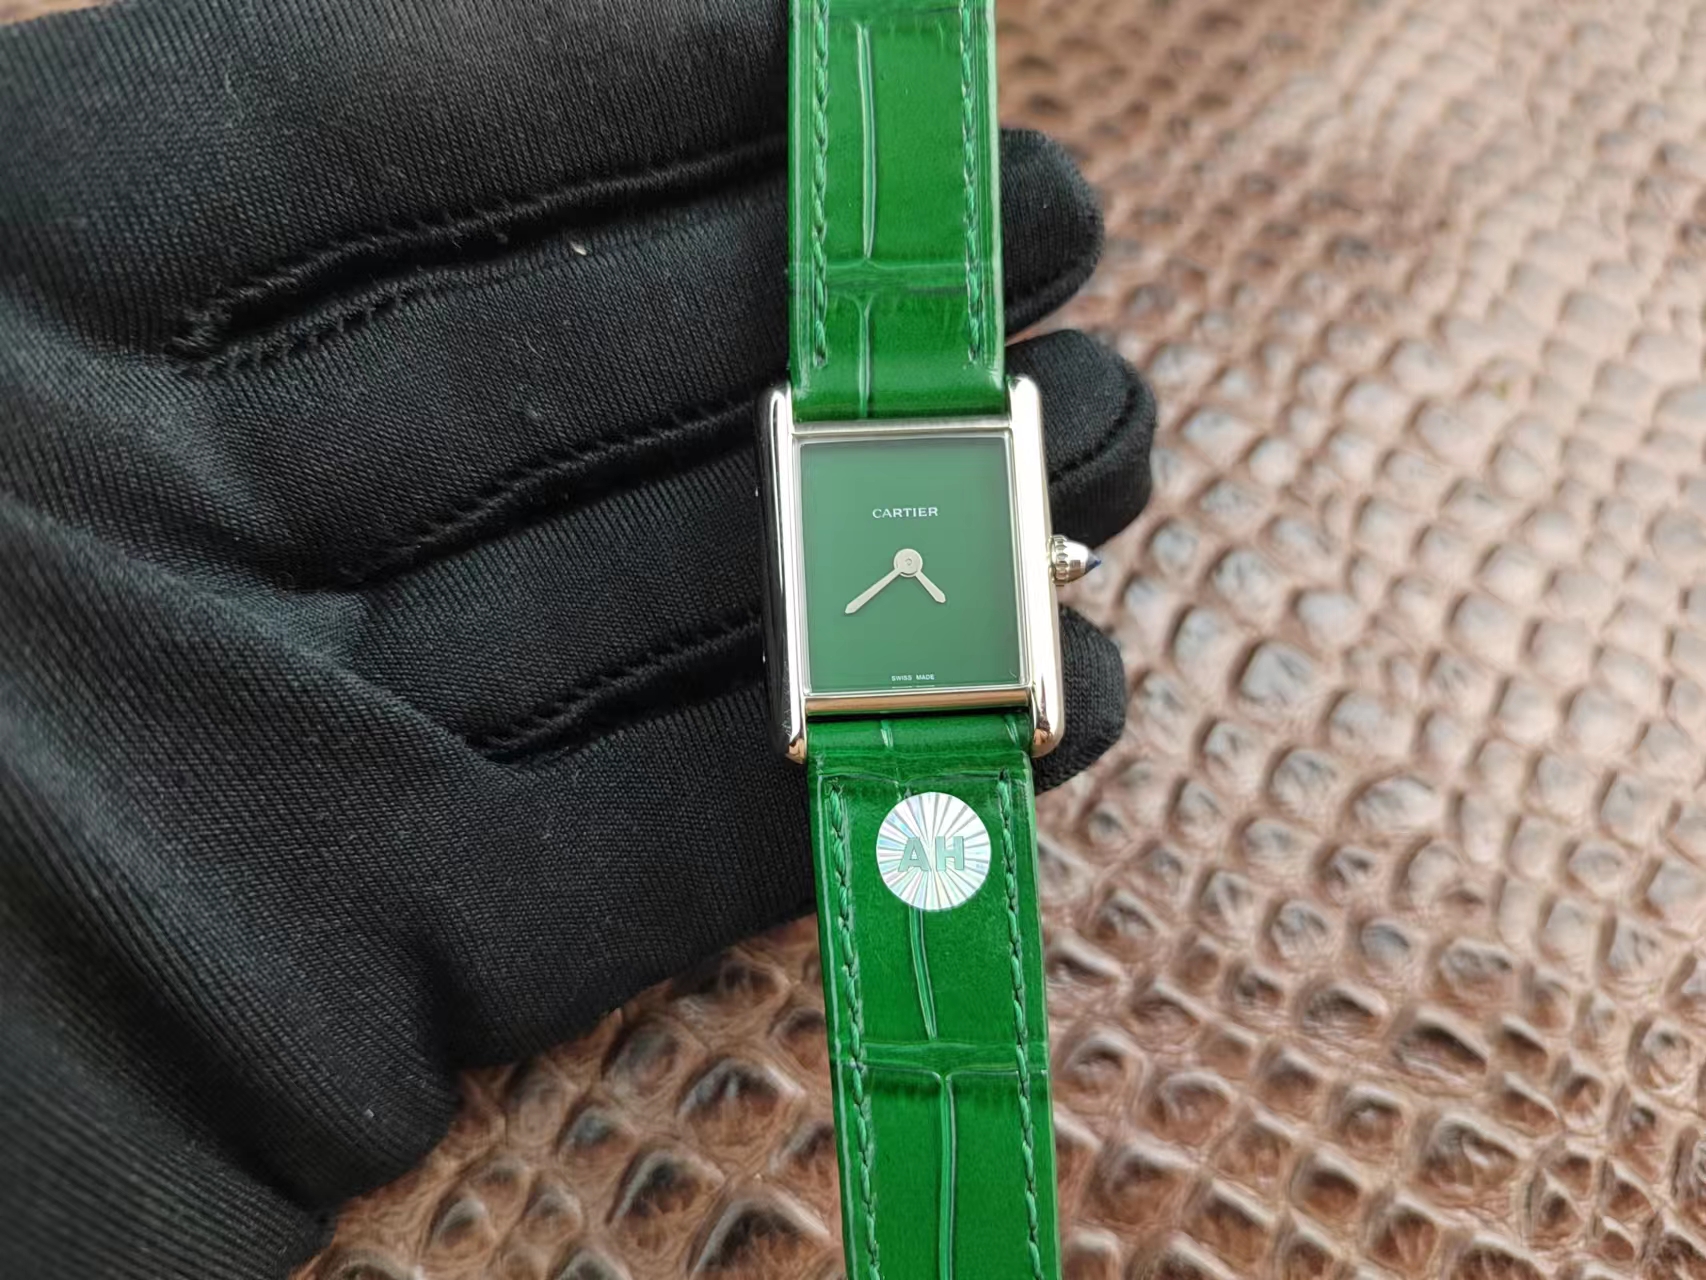 Replica Cartier H Style Stainless Steel Case Green Leather Strap Female KDY135 Quartz Watch Video